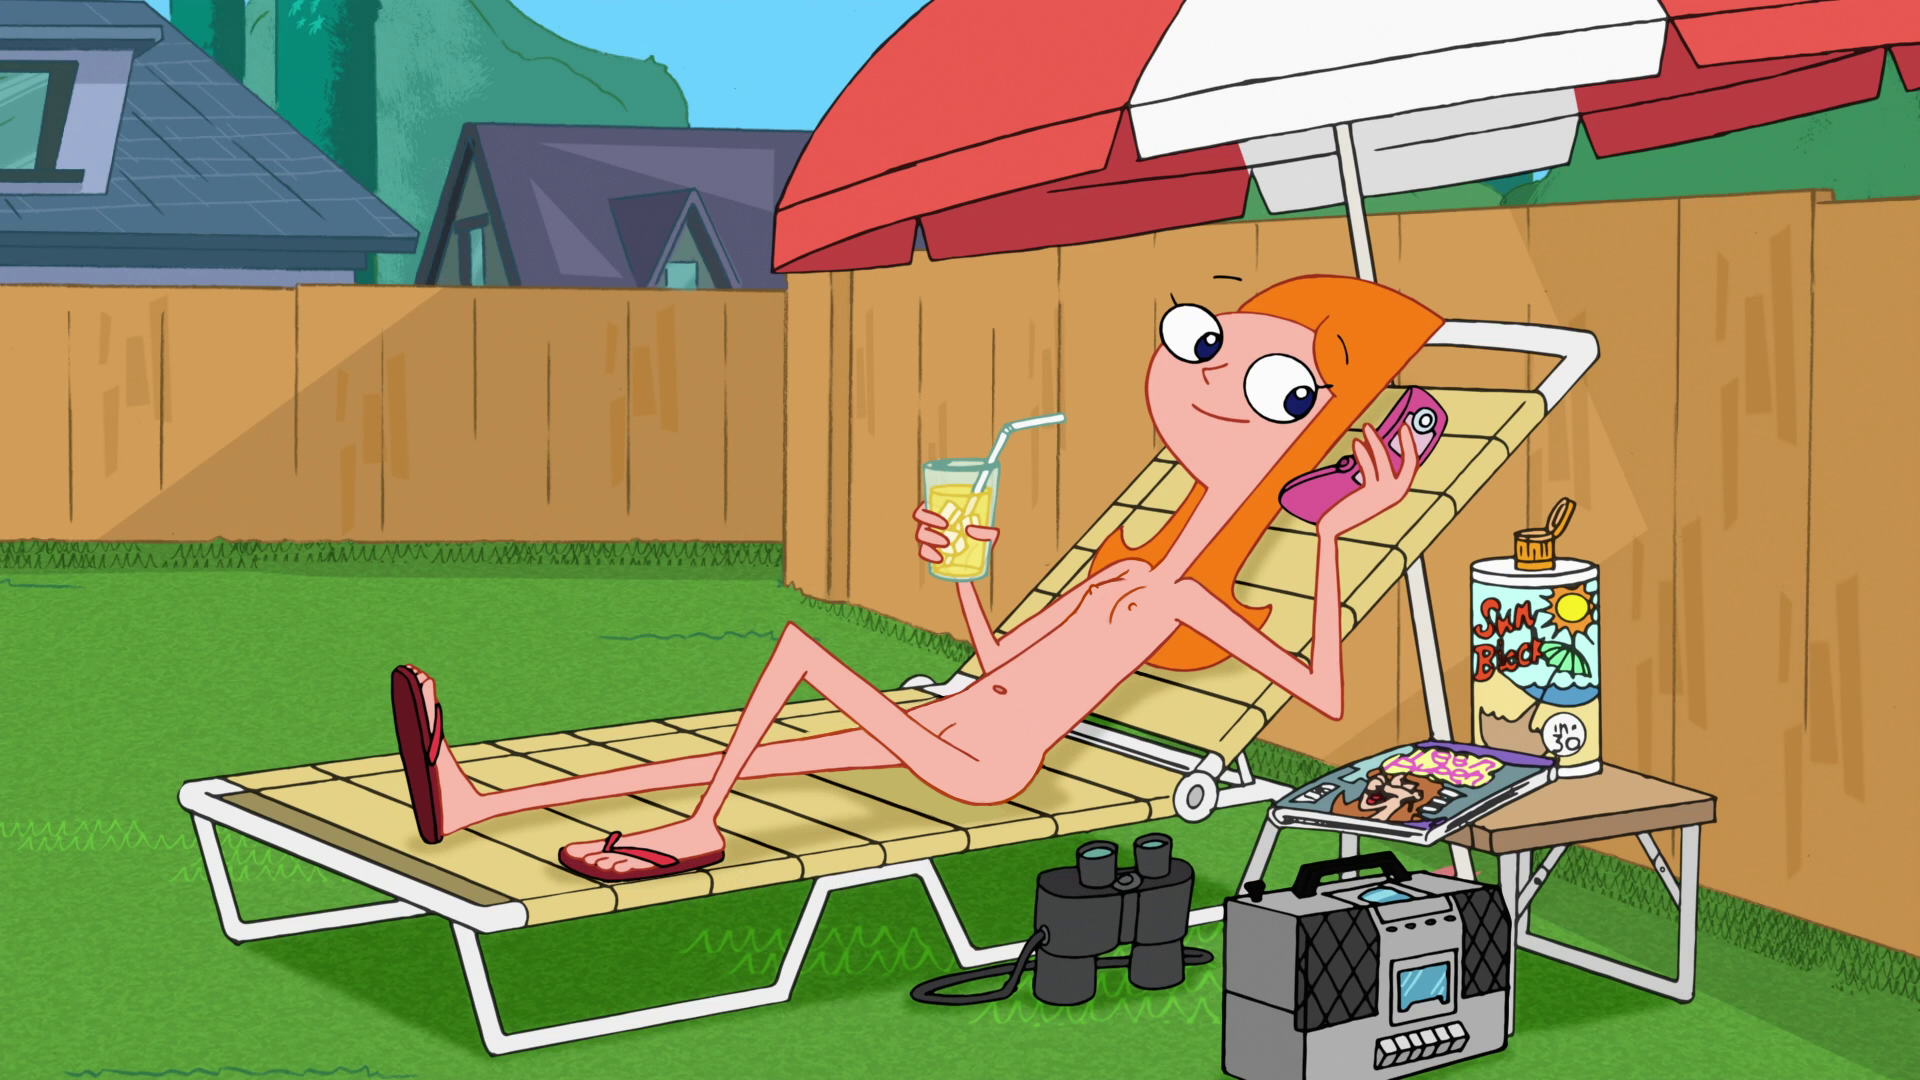 Flynn hentai candace Phineas And